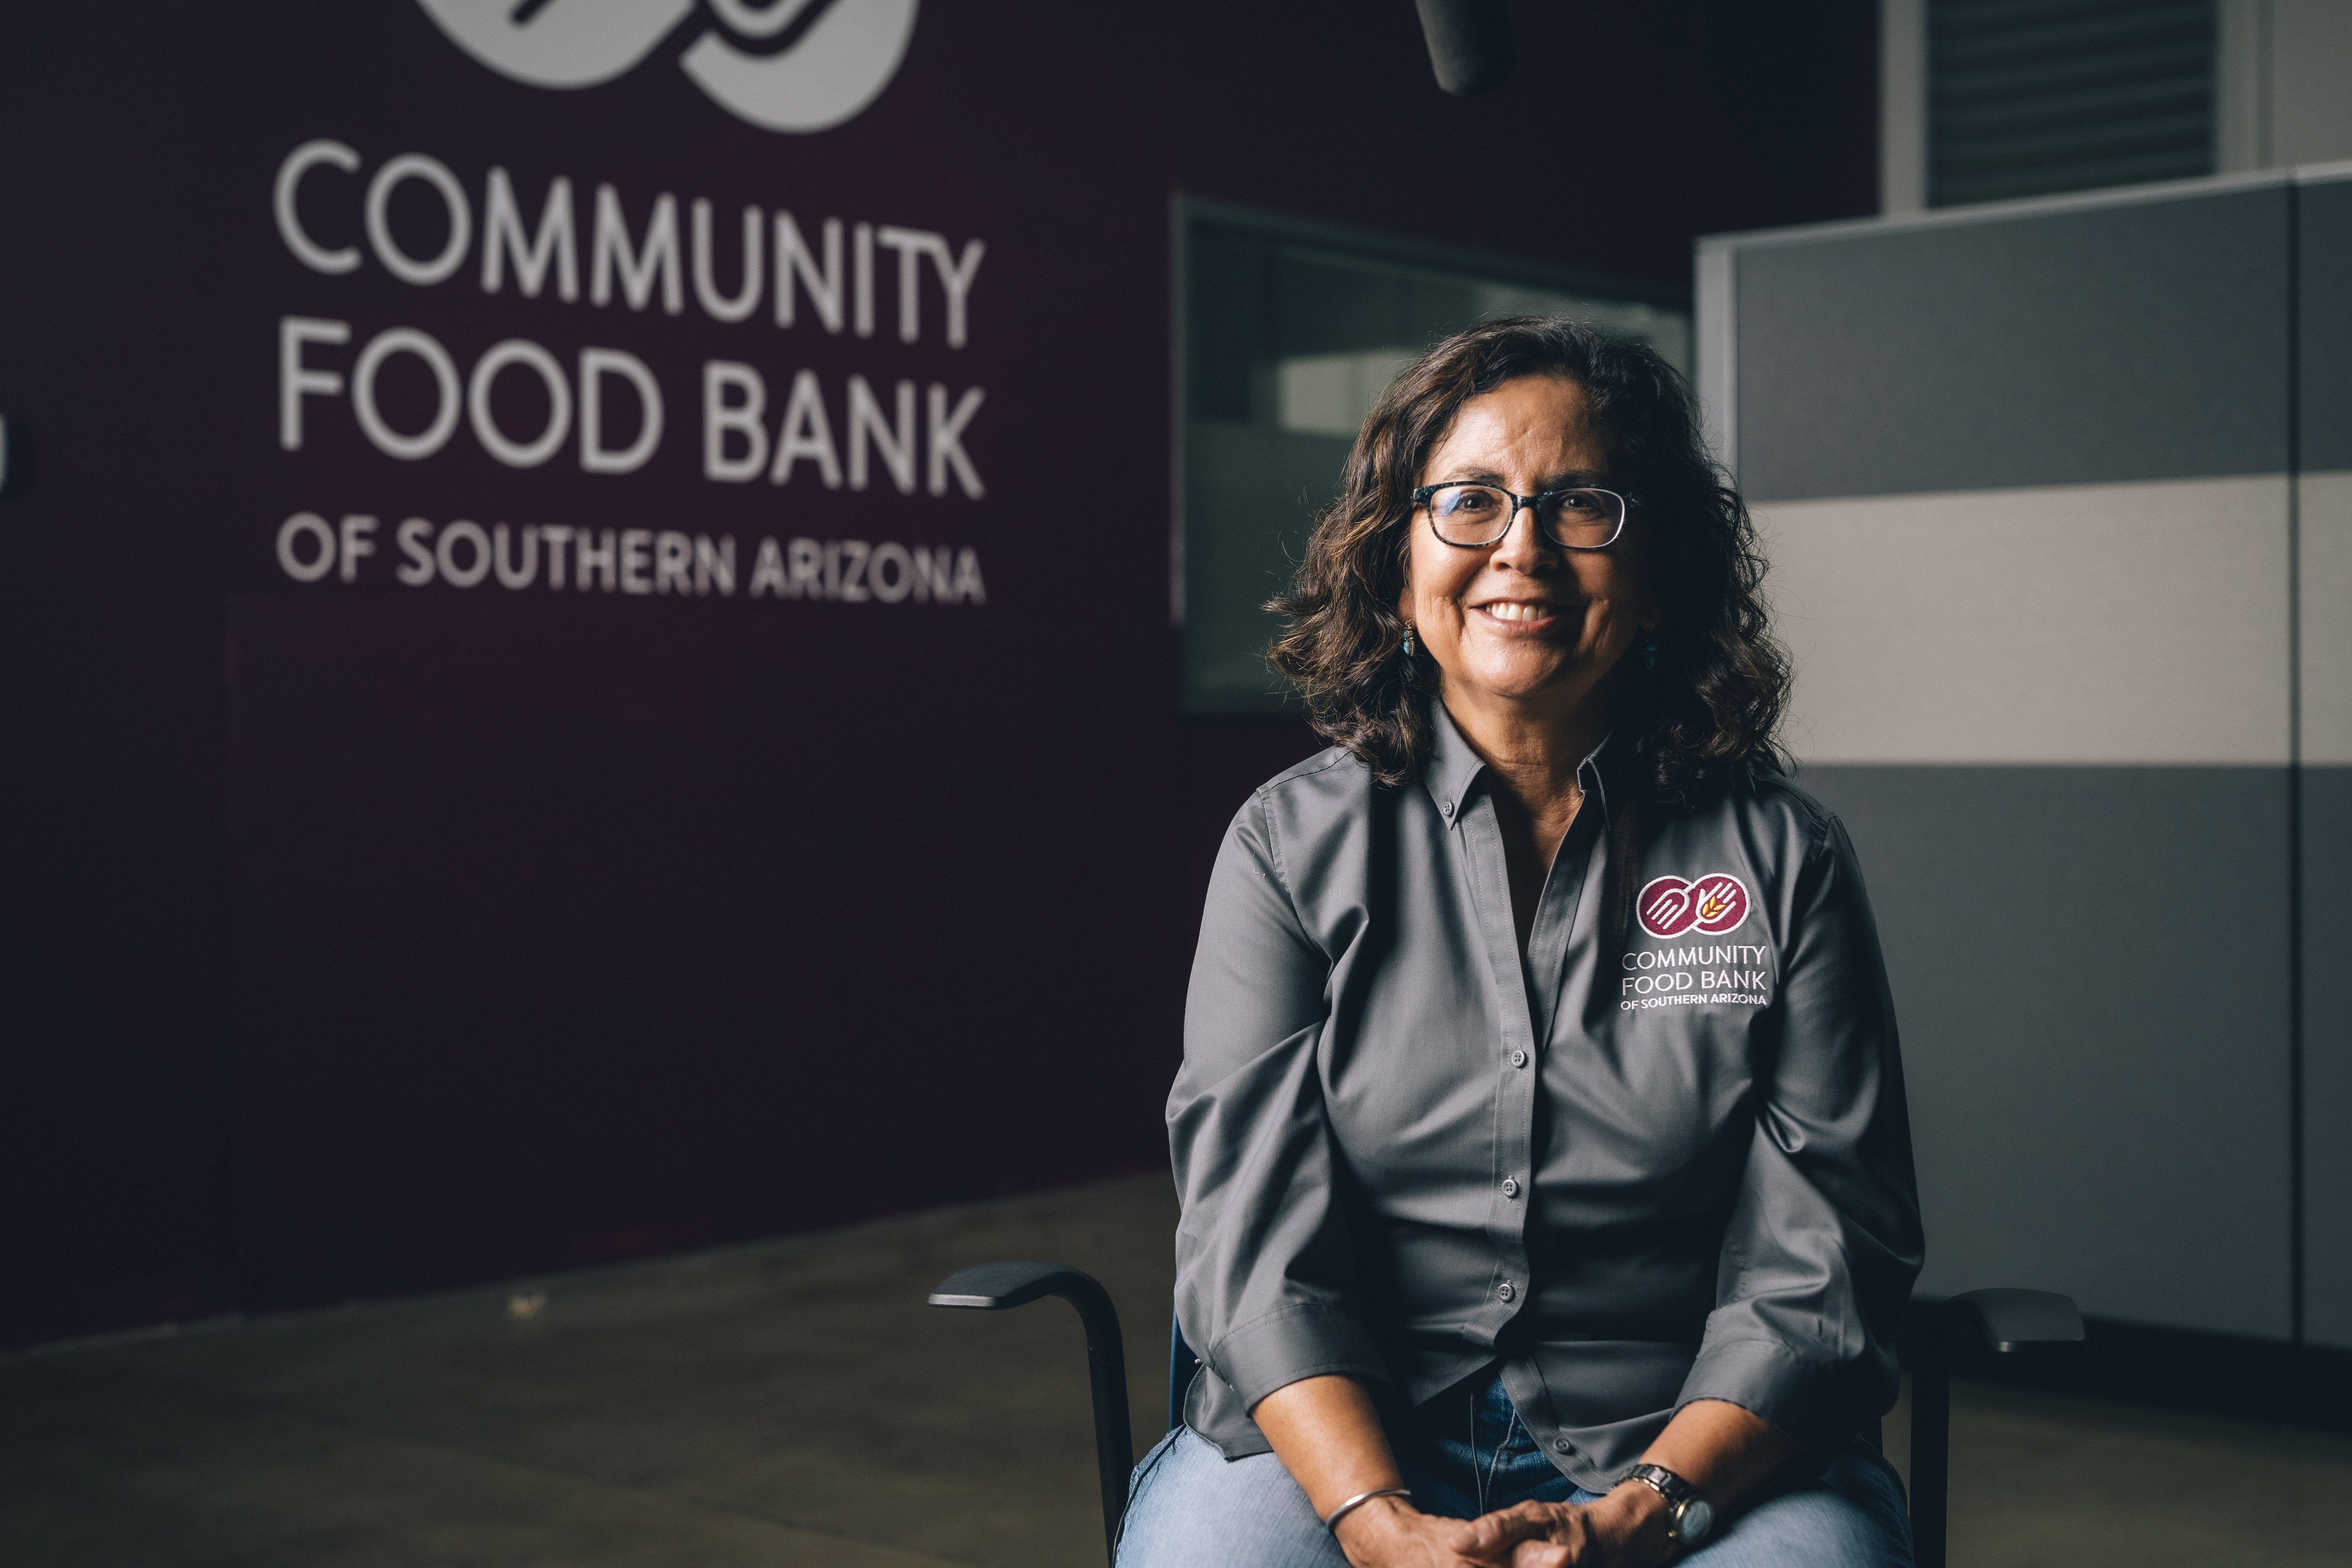 Norma Cable from Community Food Bank